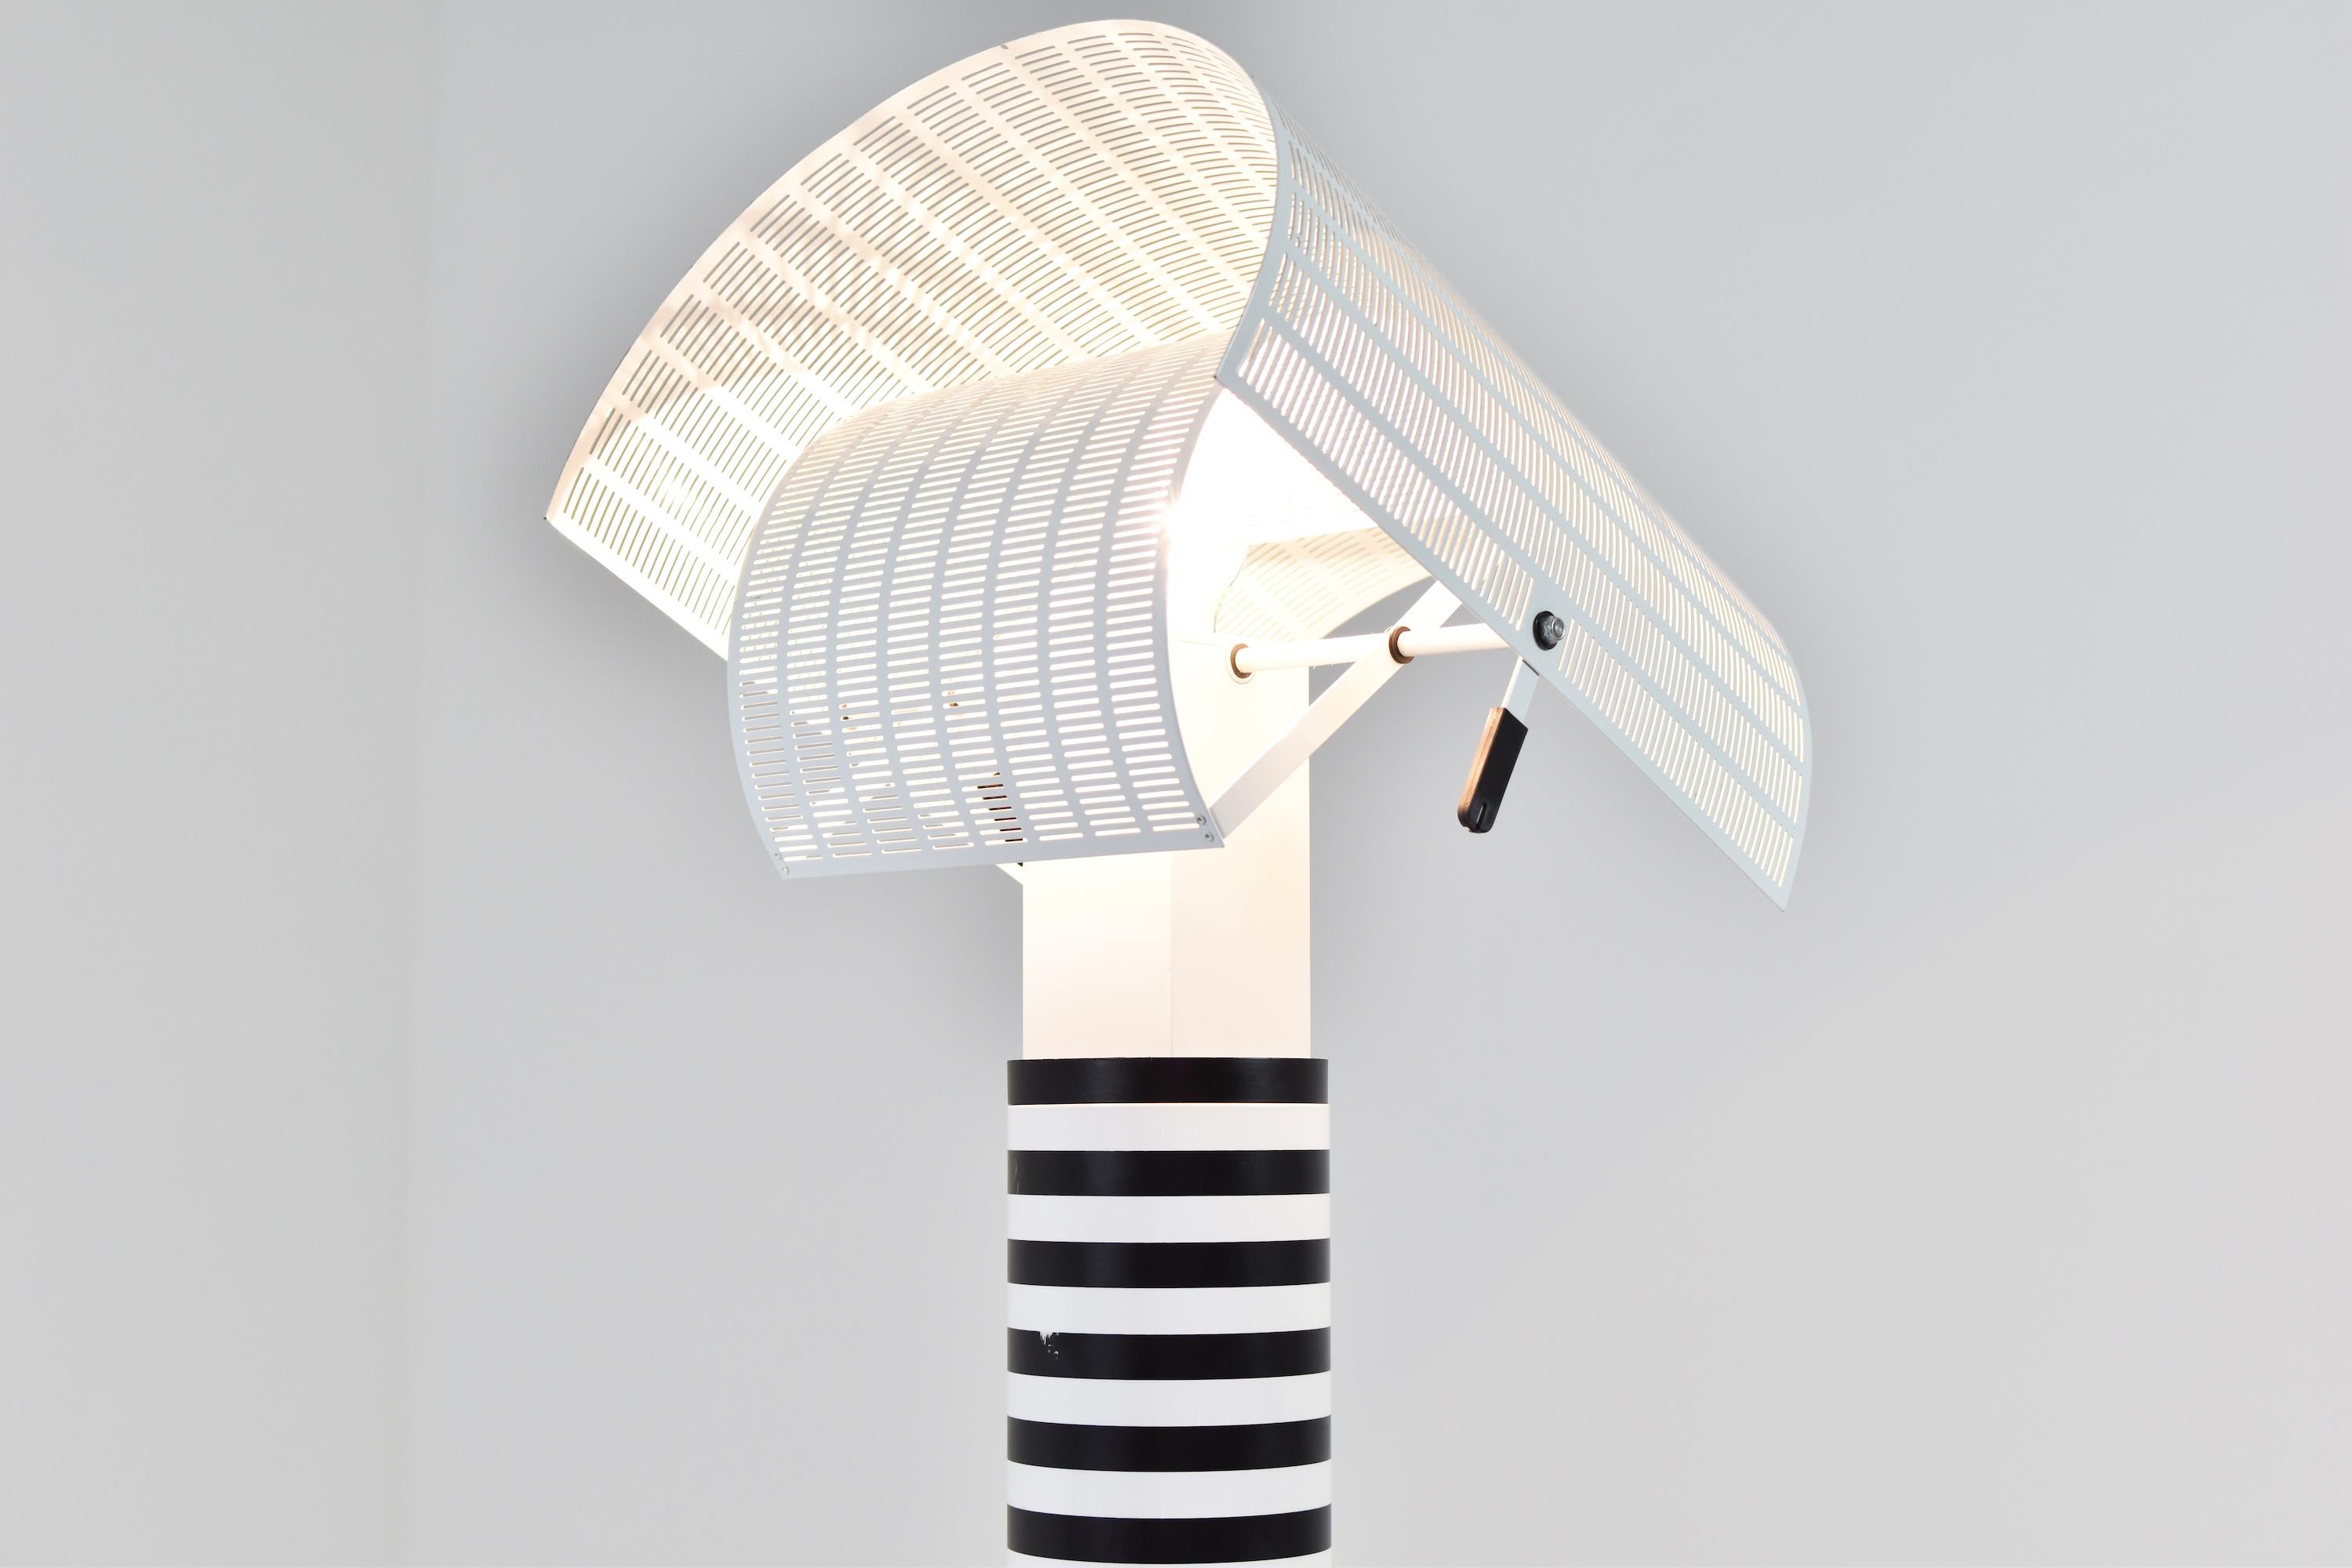 Early edition of this ‘Shogun’ table lamp by Mario Botta for Artemide, Italy 1970s. This one features enameled aluminum, steel and acrylic. The two metal diffusers adjust independently for multiple defusing and positional options. Labeled.